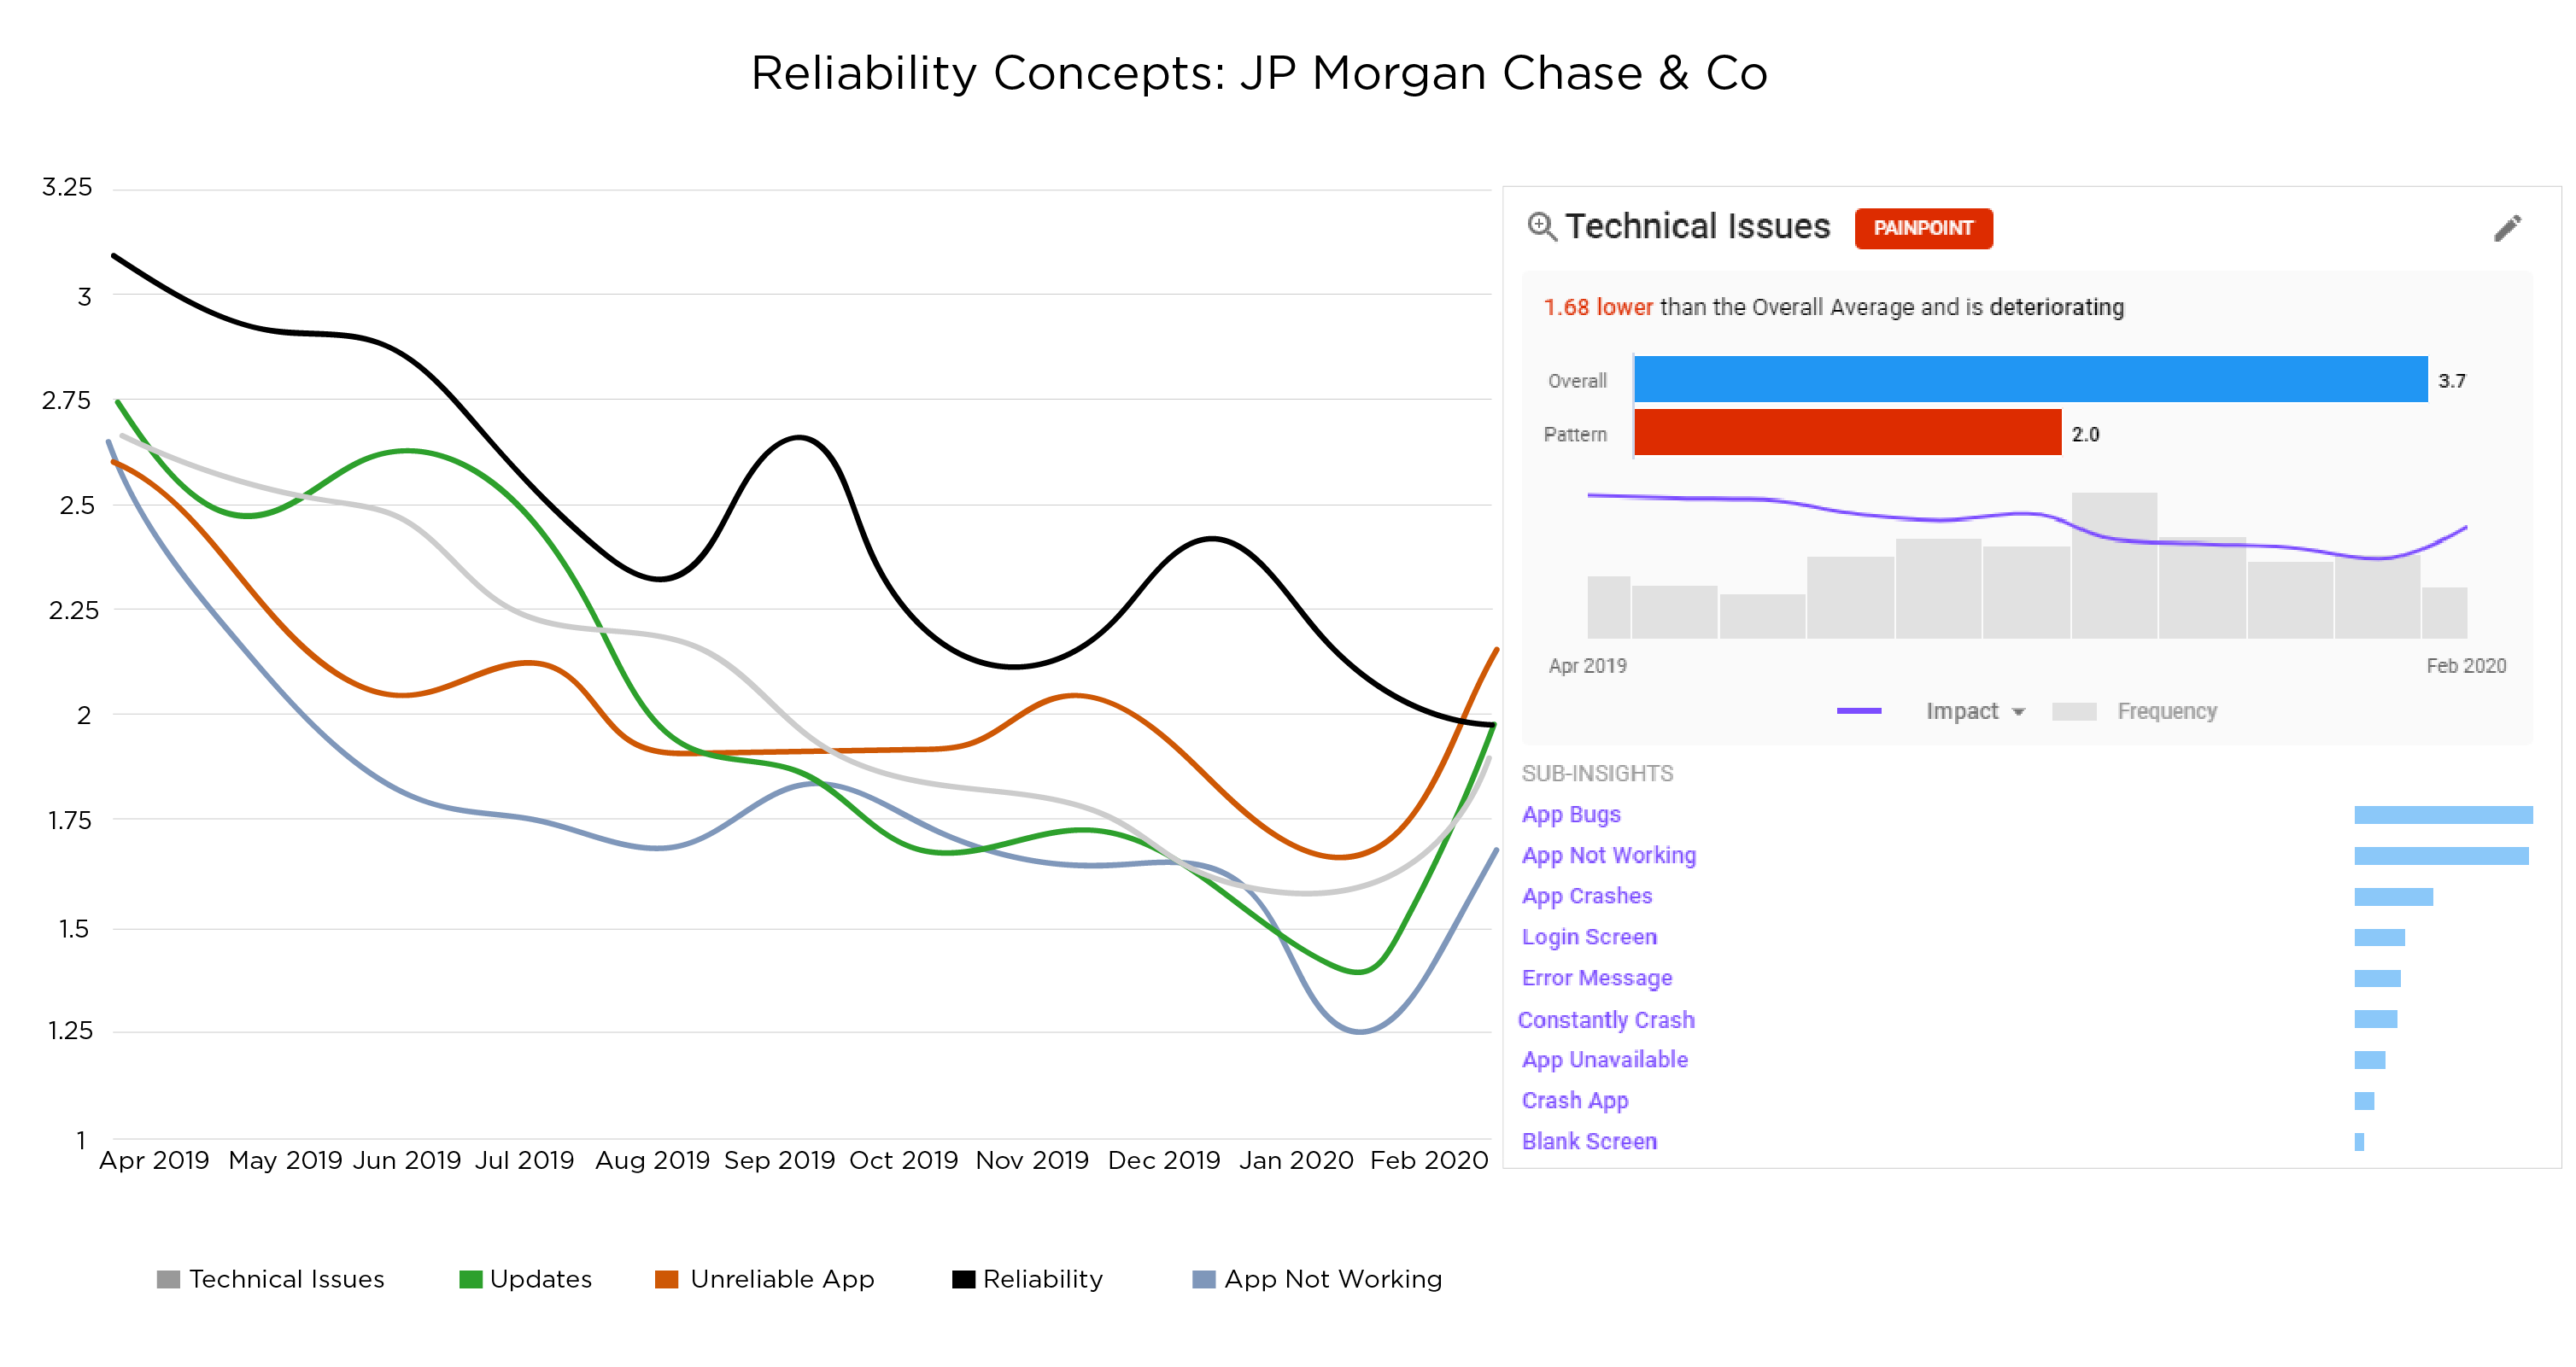 Ipiphany app benchmarking service Reliability trend over time